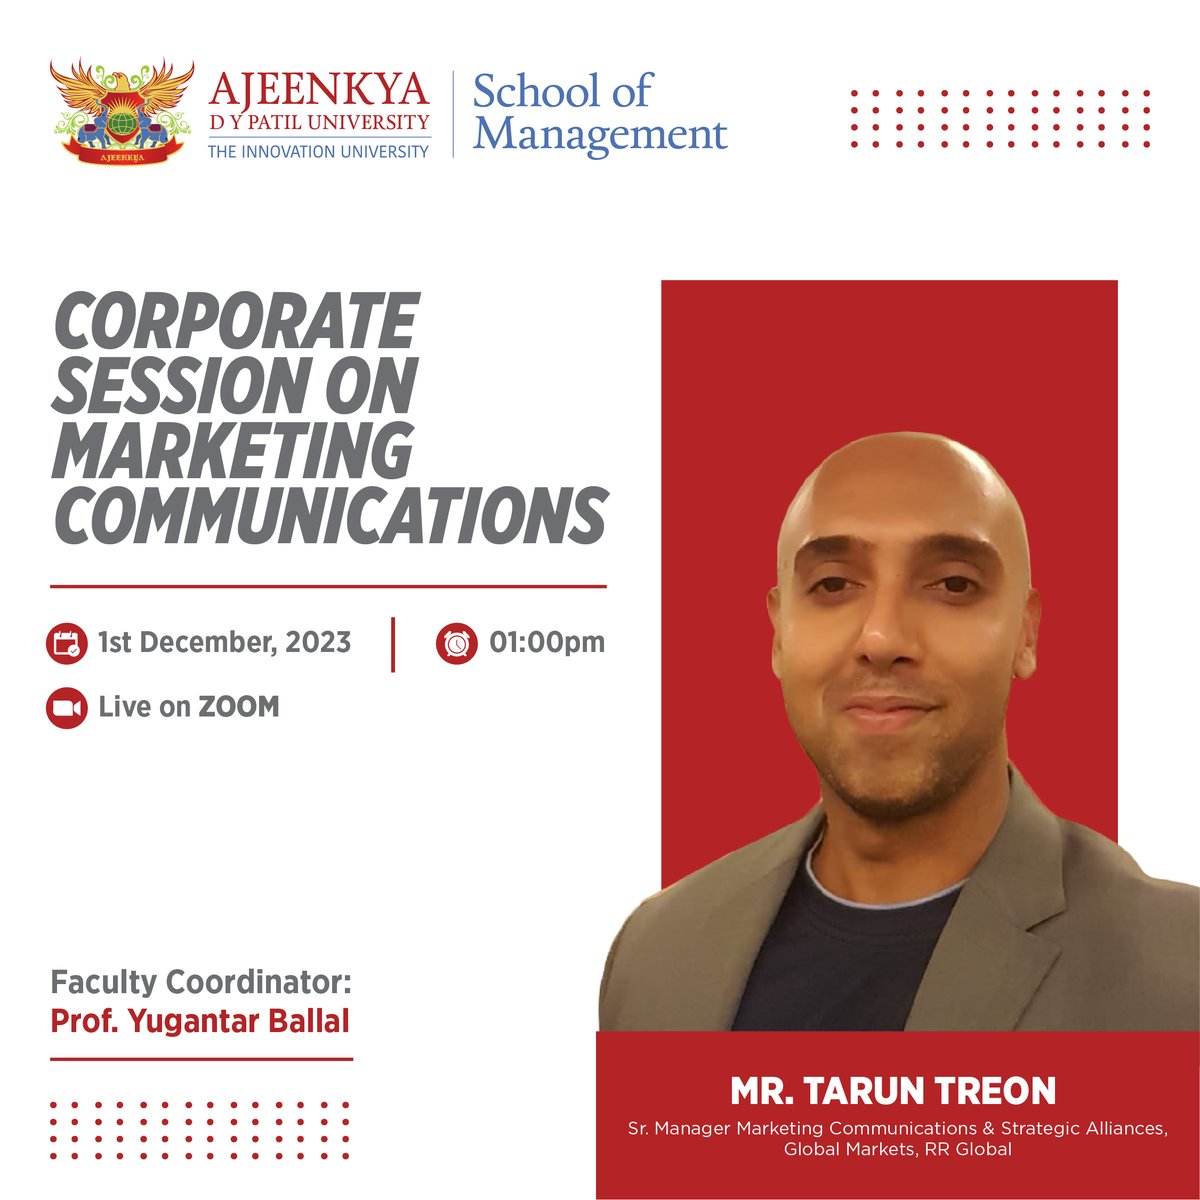 Exciting news! 🌟 Join us for an insightful Marketing Communications session via Zoom with Mr. Tarun Treon, Sr. Manager at RR Global, on Dec 1 at 1:30 pm.
Don't miss this opportunity to gain industry insights!
#ADYPU #Marketing #RRGlobal #IndustryExperts #ManagementSchool